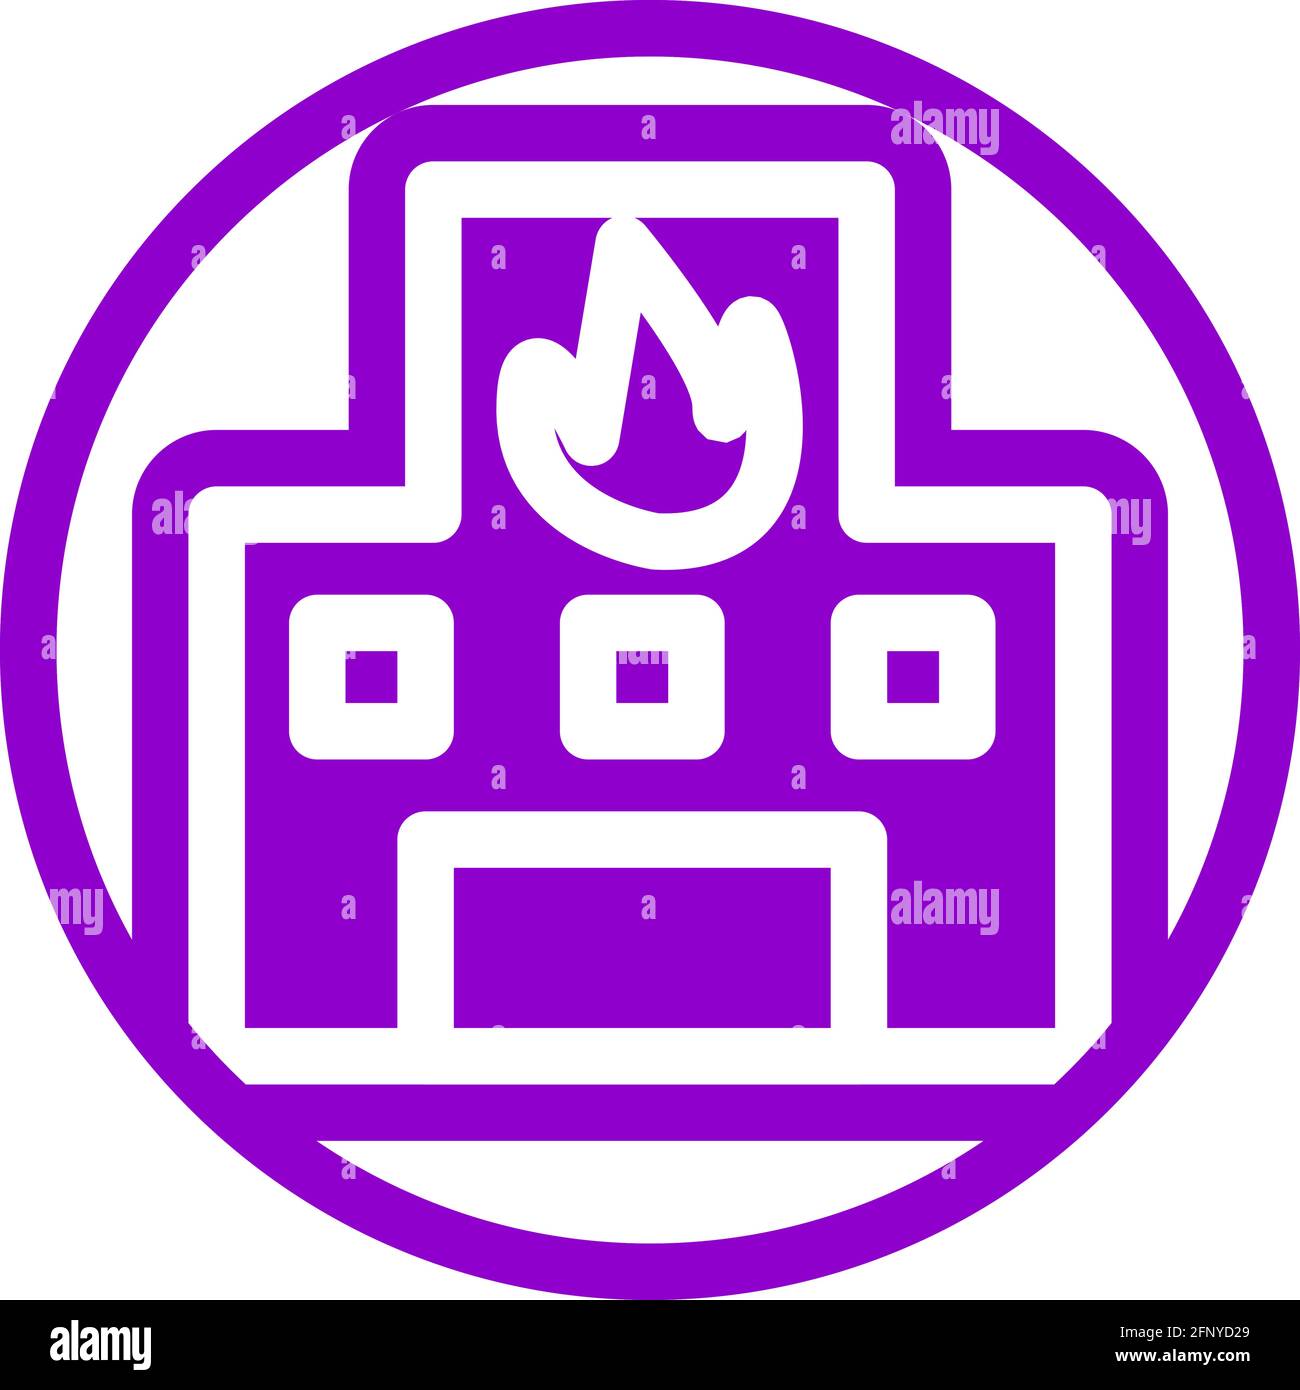 Fire station icon in flat design with purple color and outline on a line circle background. Stock Vector